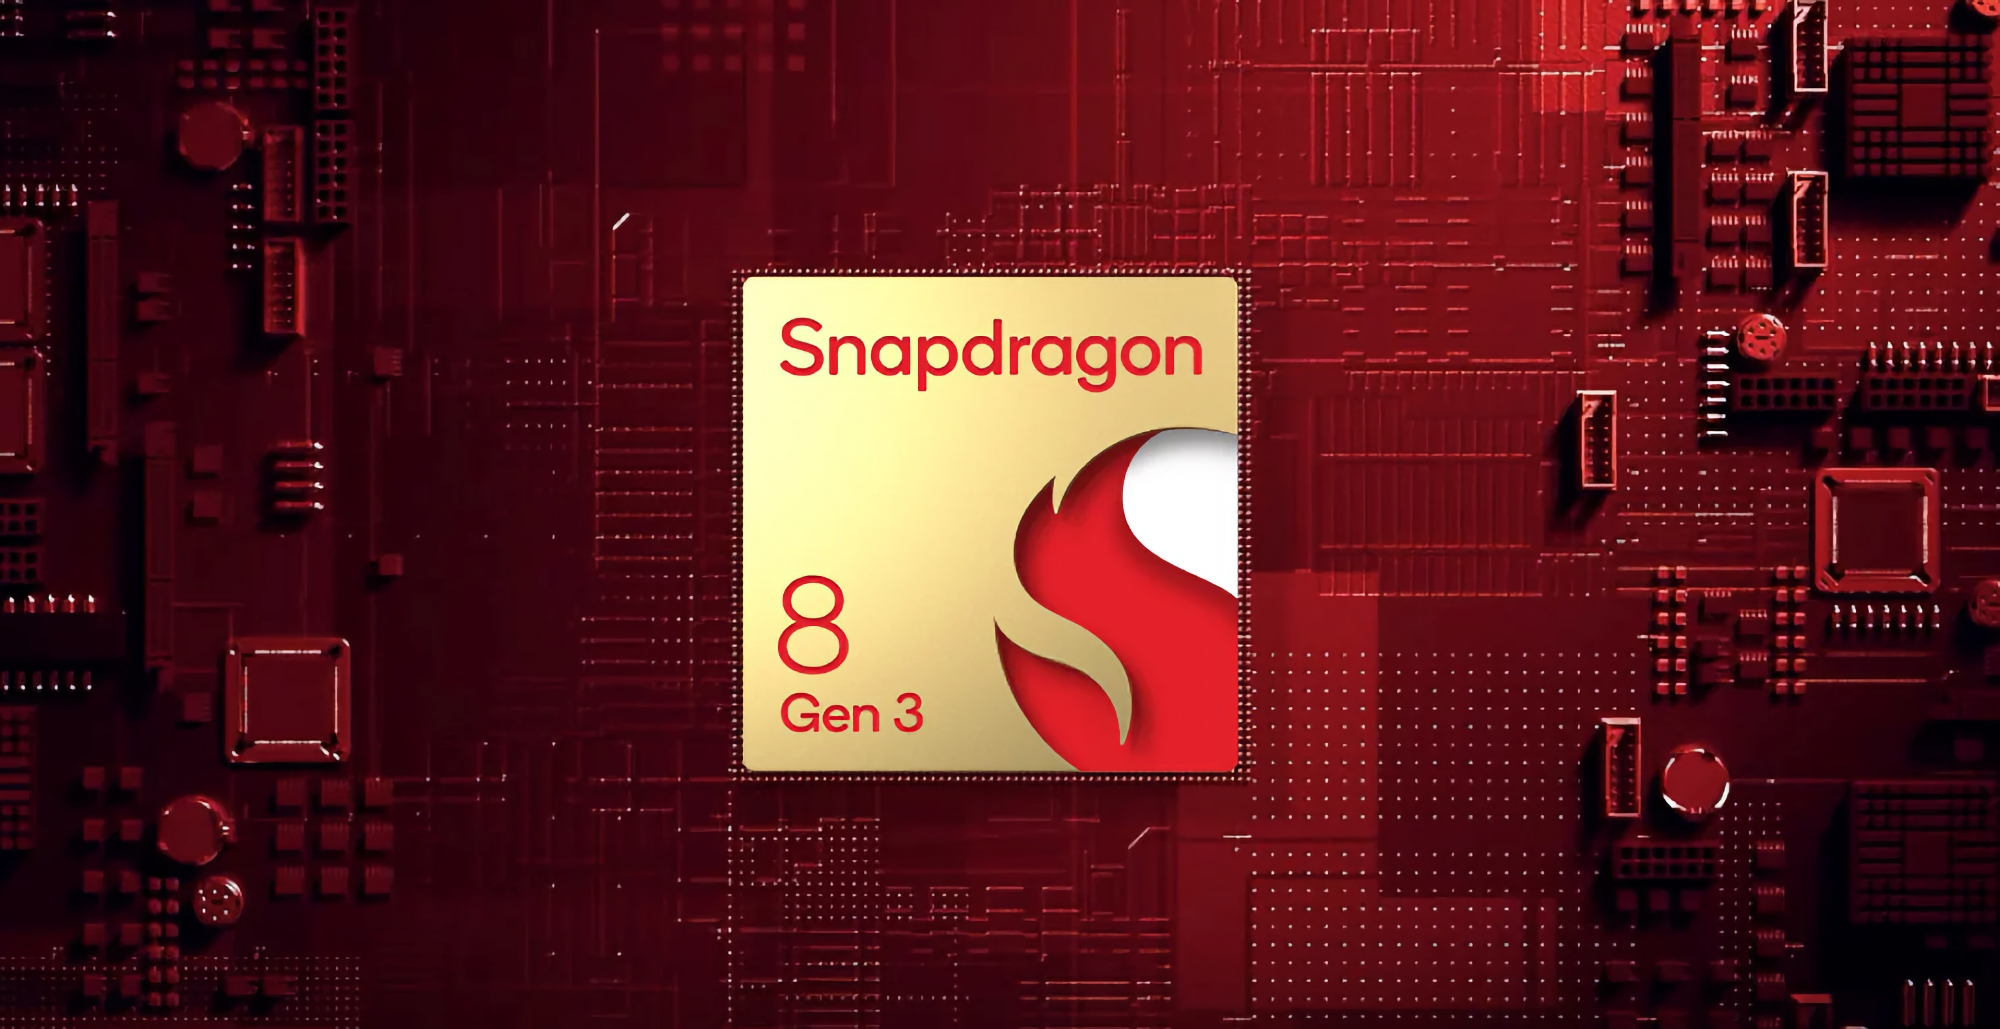 Qualcomm announced the flagship Snapdragon 8 Gen 3 chip: 30 per cent faster CPU, 25 per cent faster GPU and support for gaming up to 240 fps